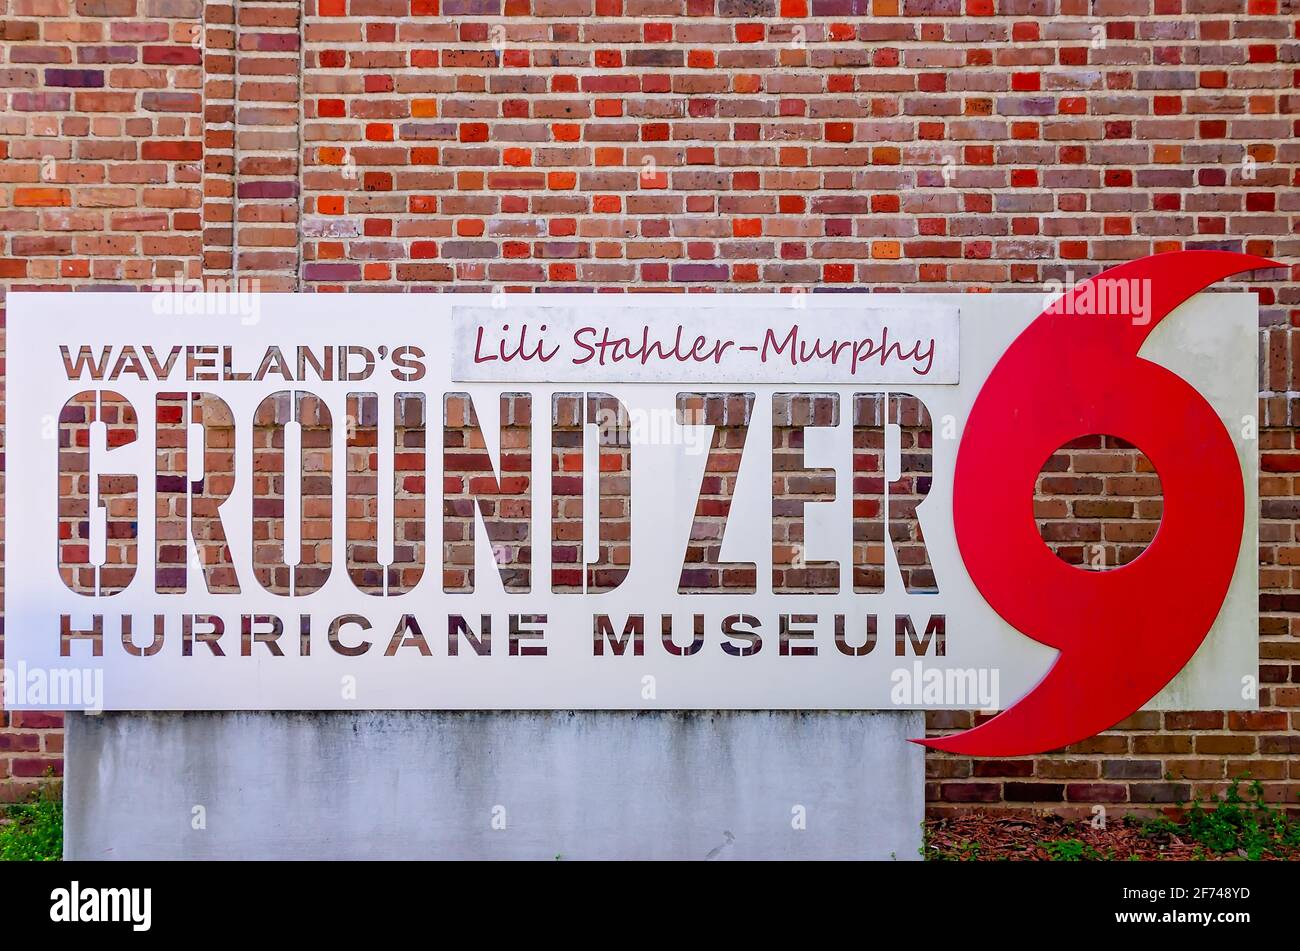 The Ground Zero Hurricane Museum is pictured, April 3, 2021, in Waveland, Mississippi. Stock Photo